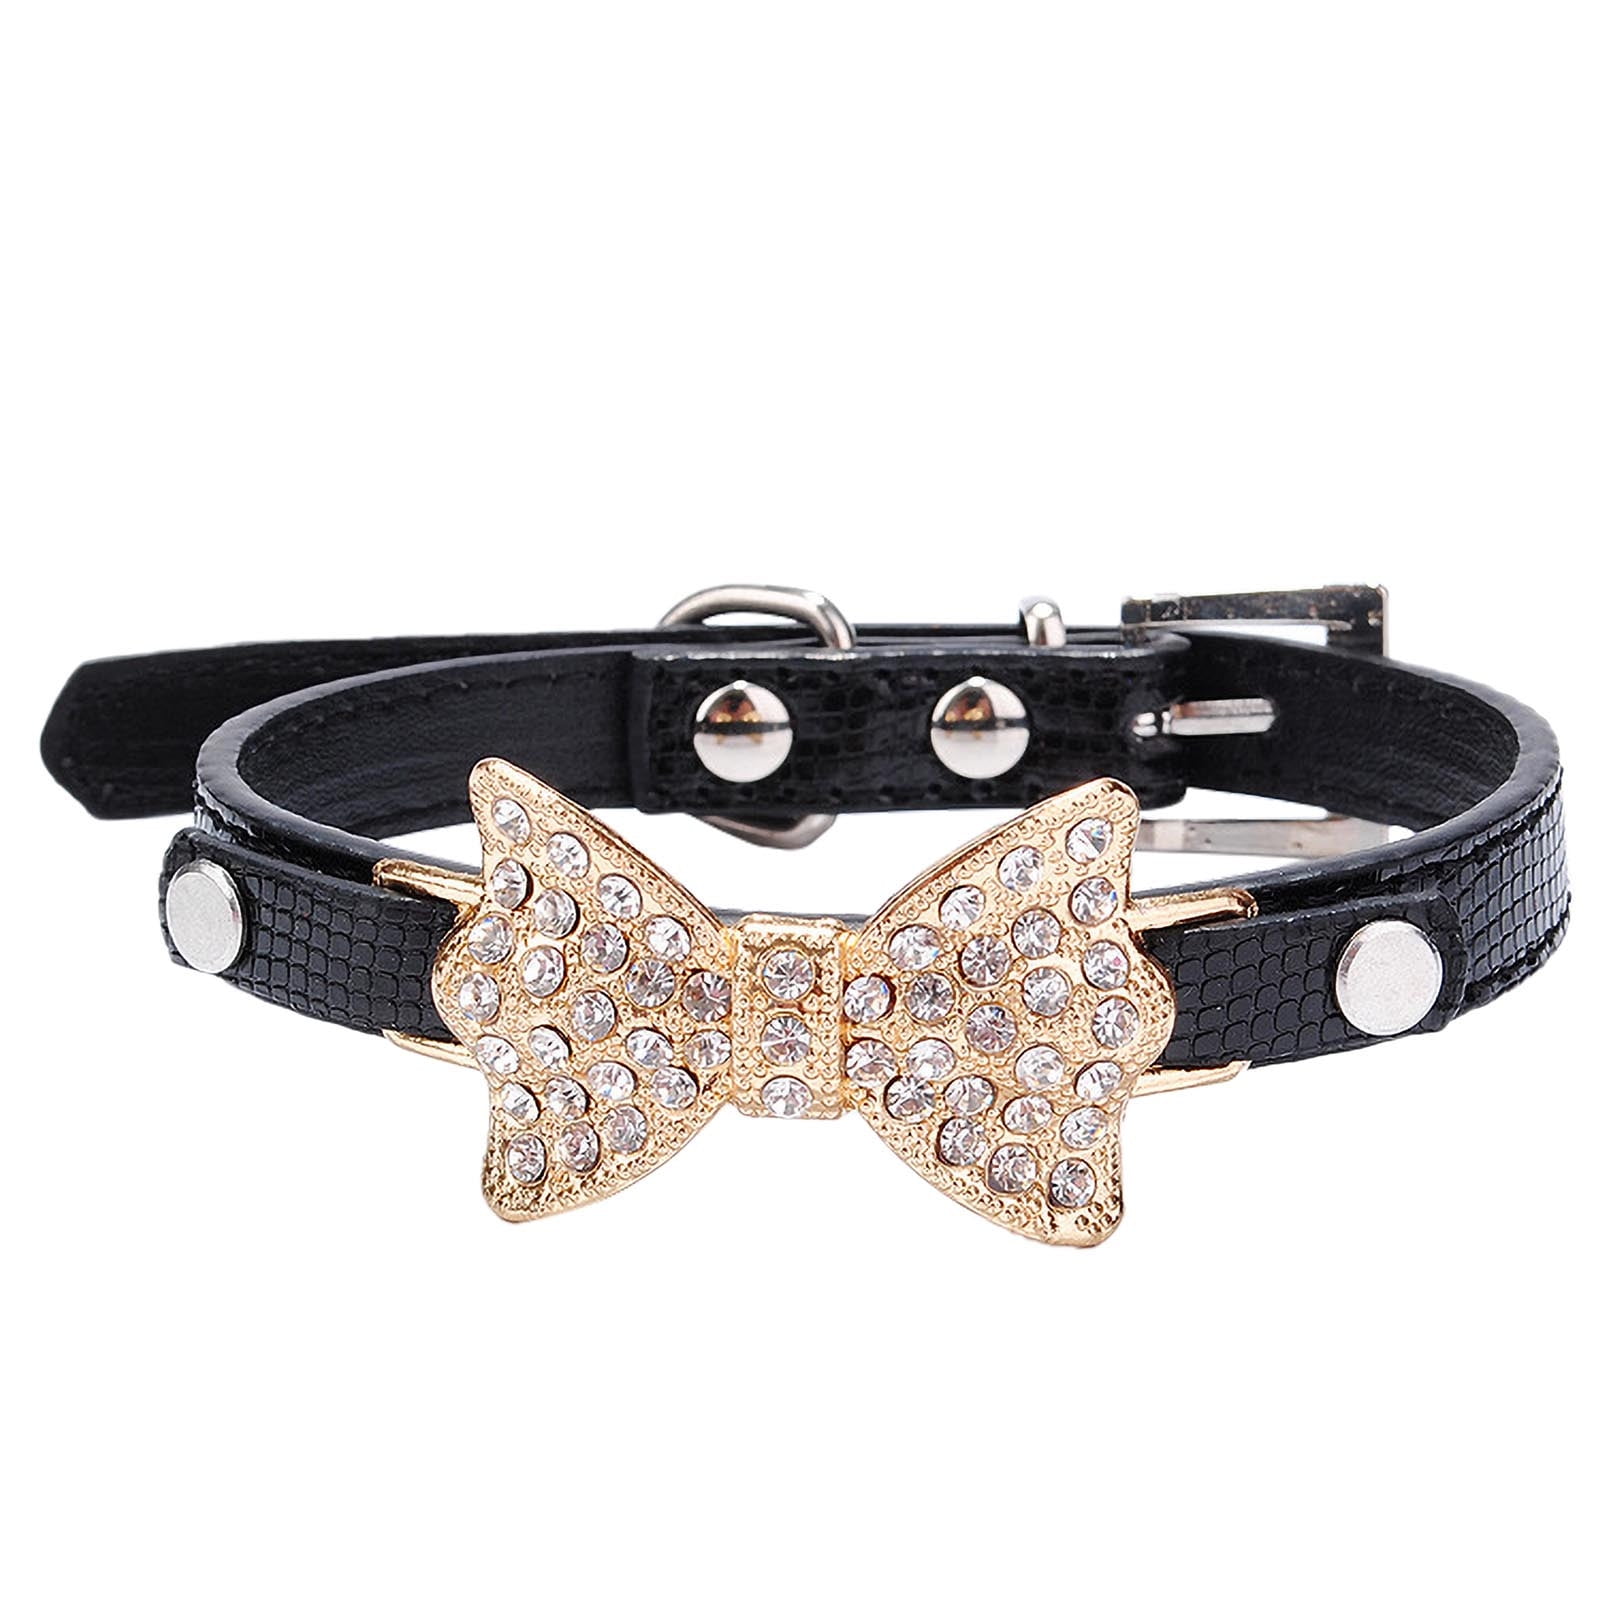 Elegant Crystal Dog Collar Necklace Choker Style Rhinestone Pearl Luxury Pet  Dog Accessories Pet Necklace For Dog Chihuahua From Yiyu_hg, $9.28 |  DHgate.Com